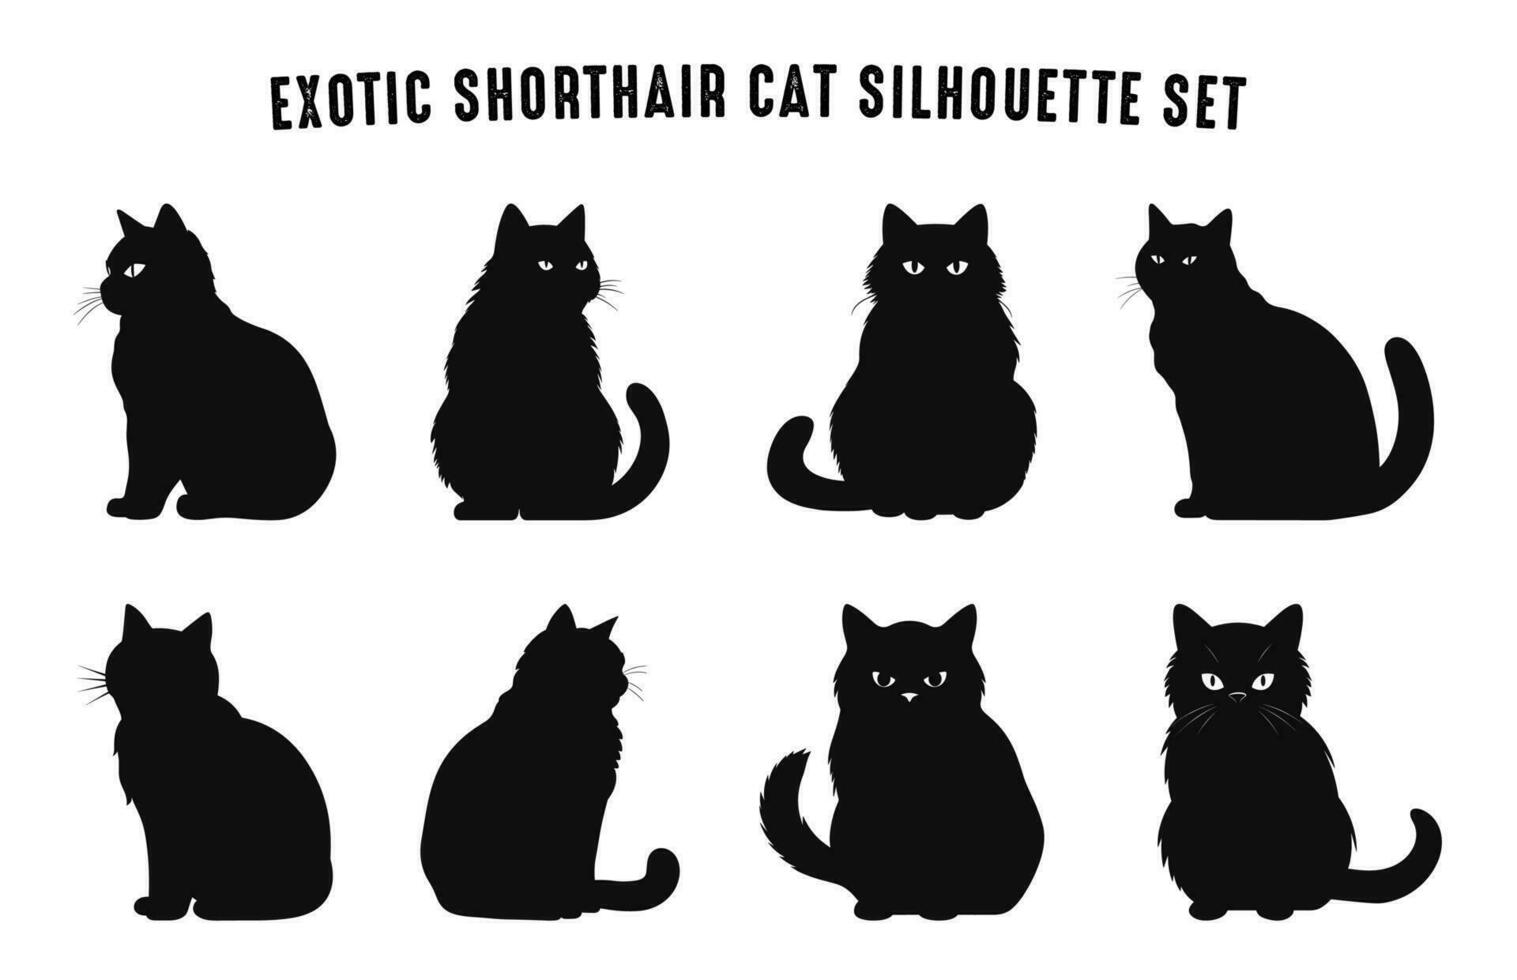 Exotic Shorthair Cat Breed Silhouettes Vector Set, Black Cats Silhouette collection